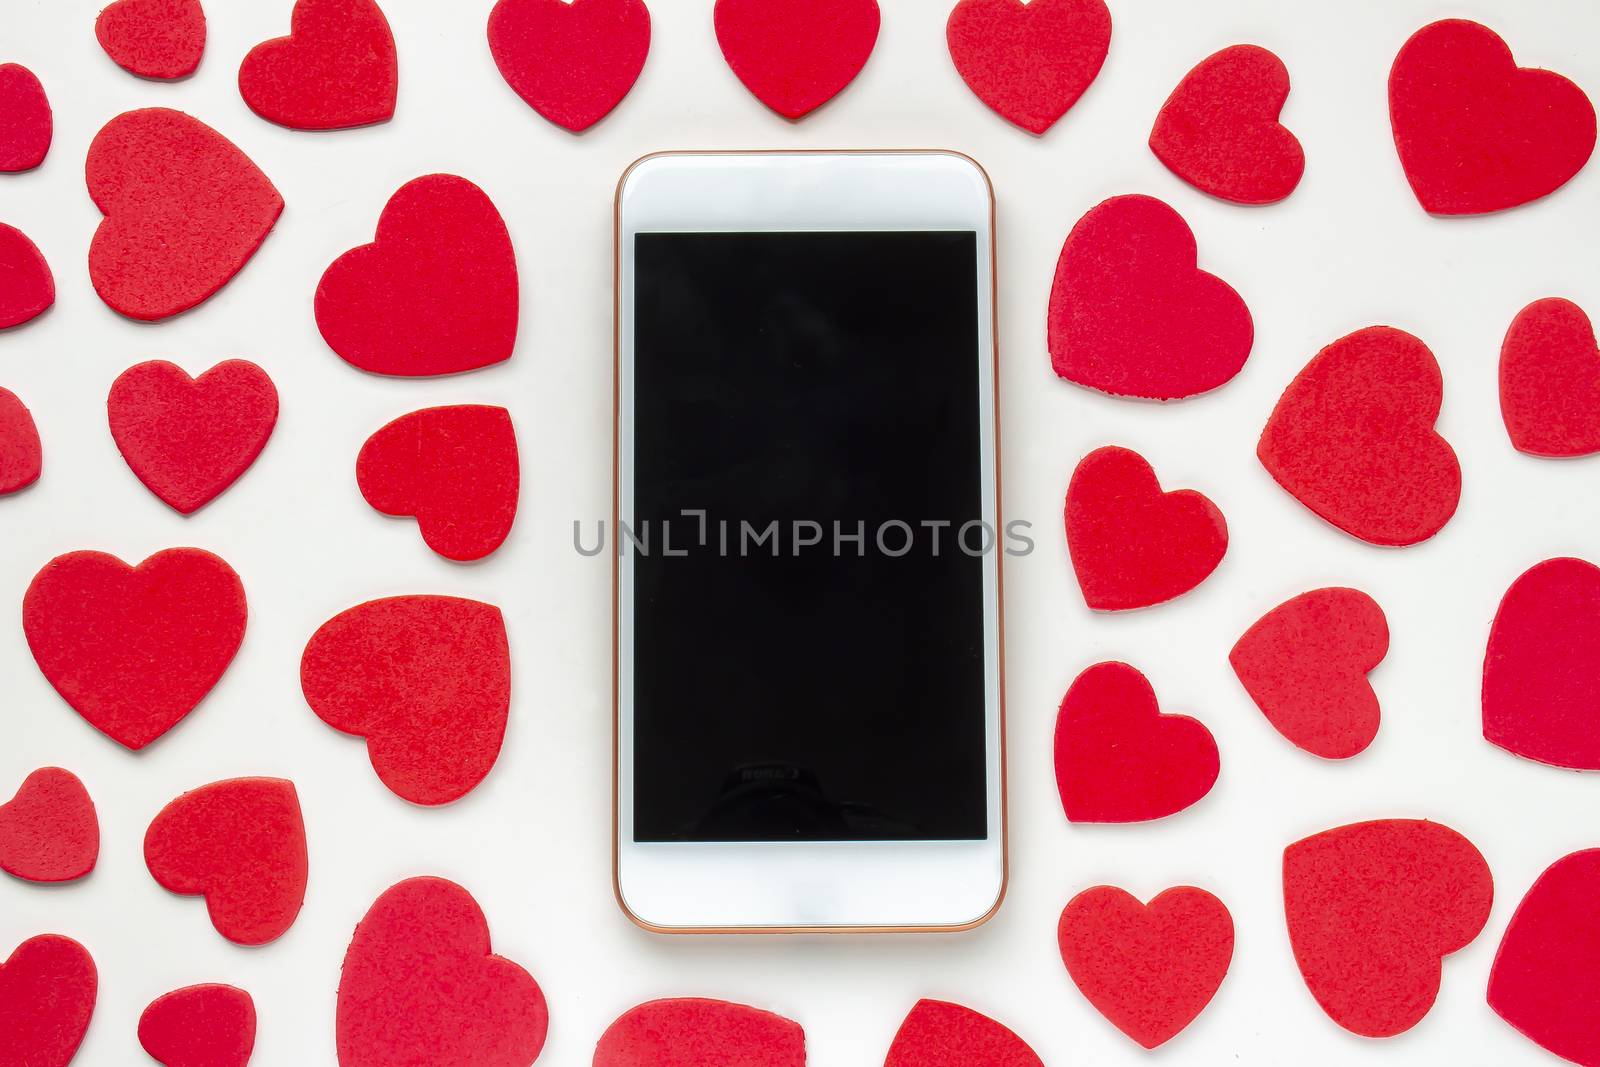 A smart phone with red hearts around on a white background by oasisamuel